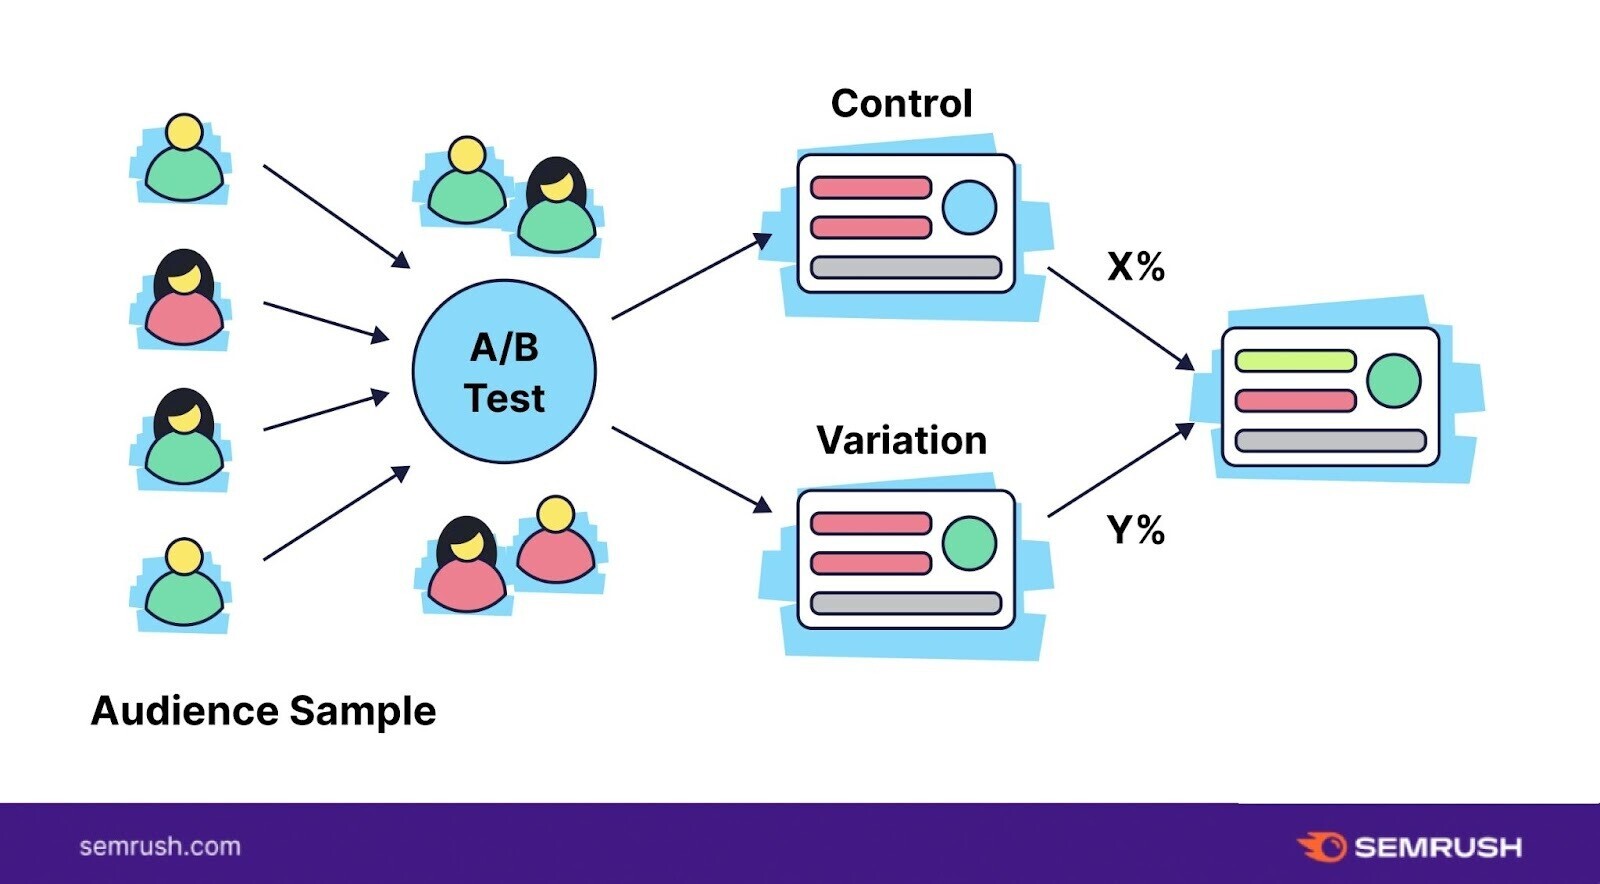 A/B testing is a process in which two groups are exposed to different experiences in order for marketing teams to prioritize the best-performing experience